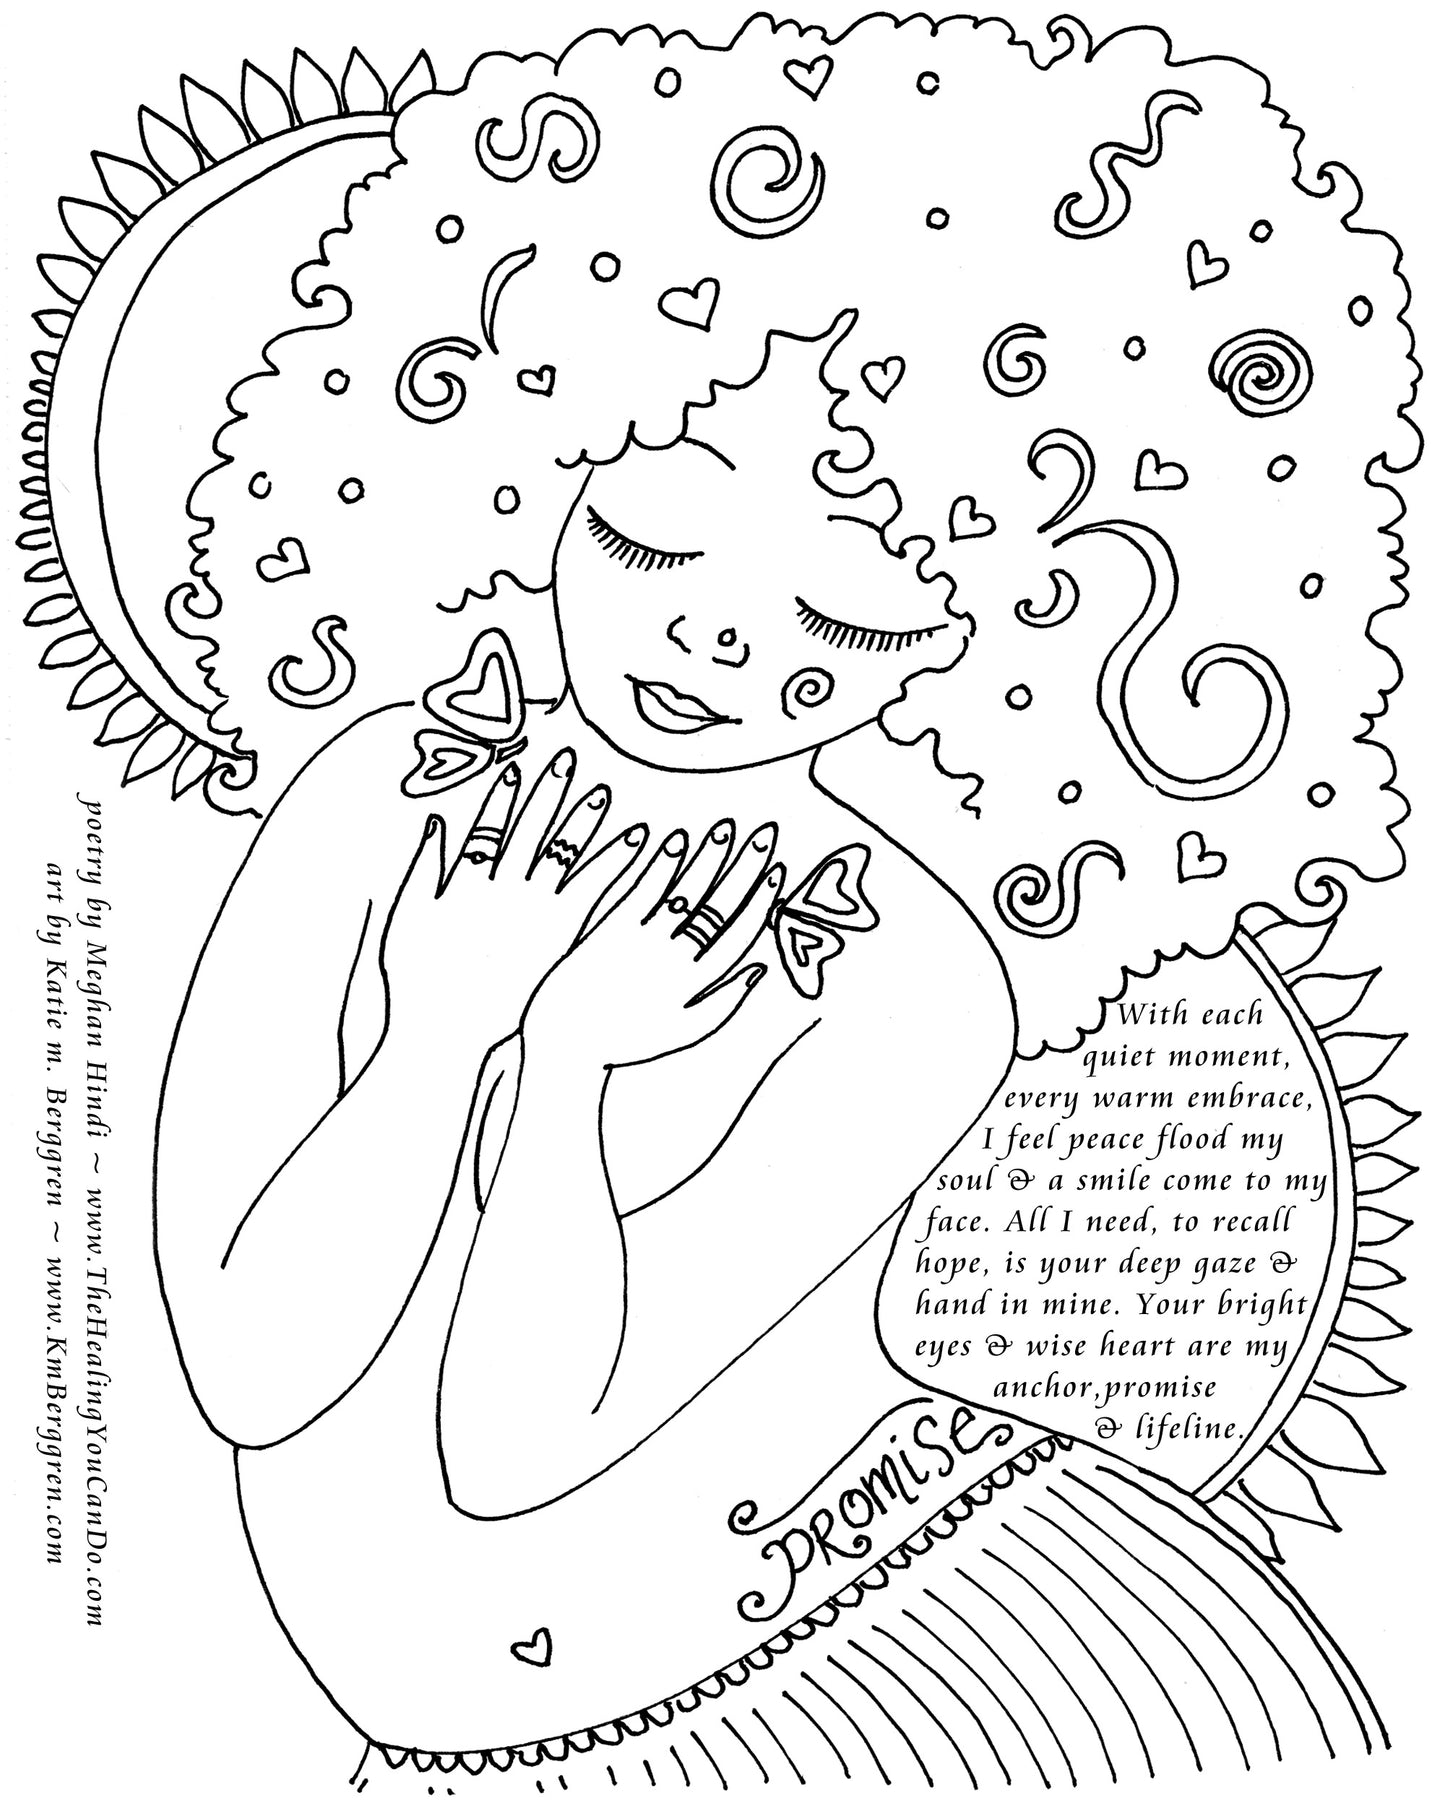 free motherhood and empowerment coloring pages by KmBerggren